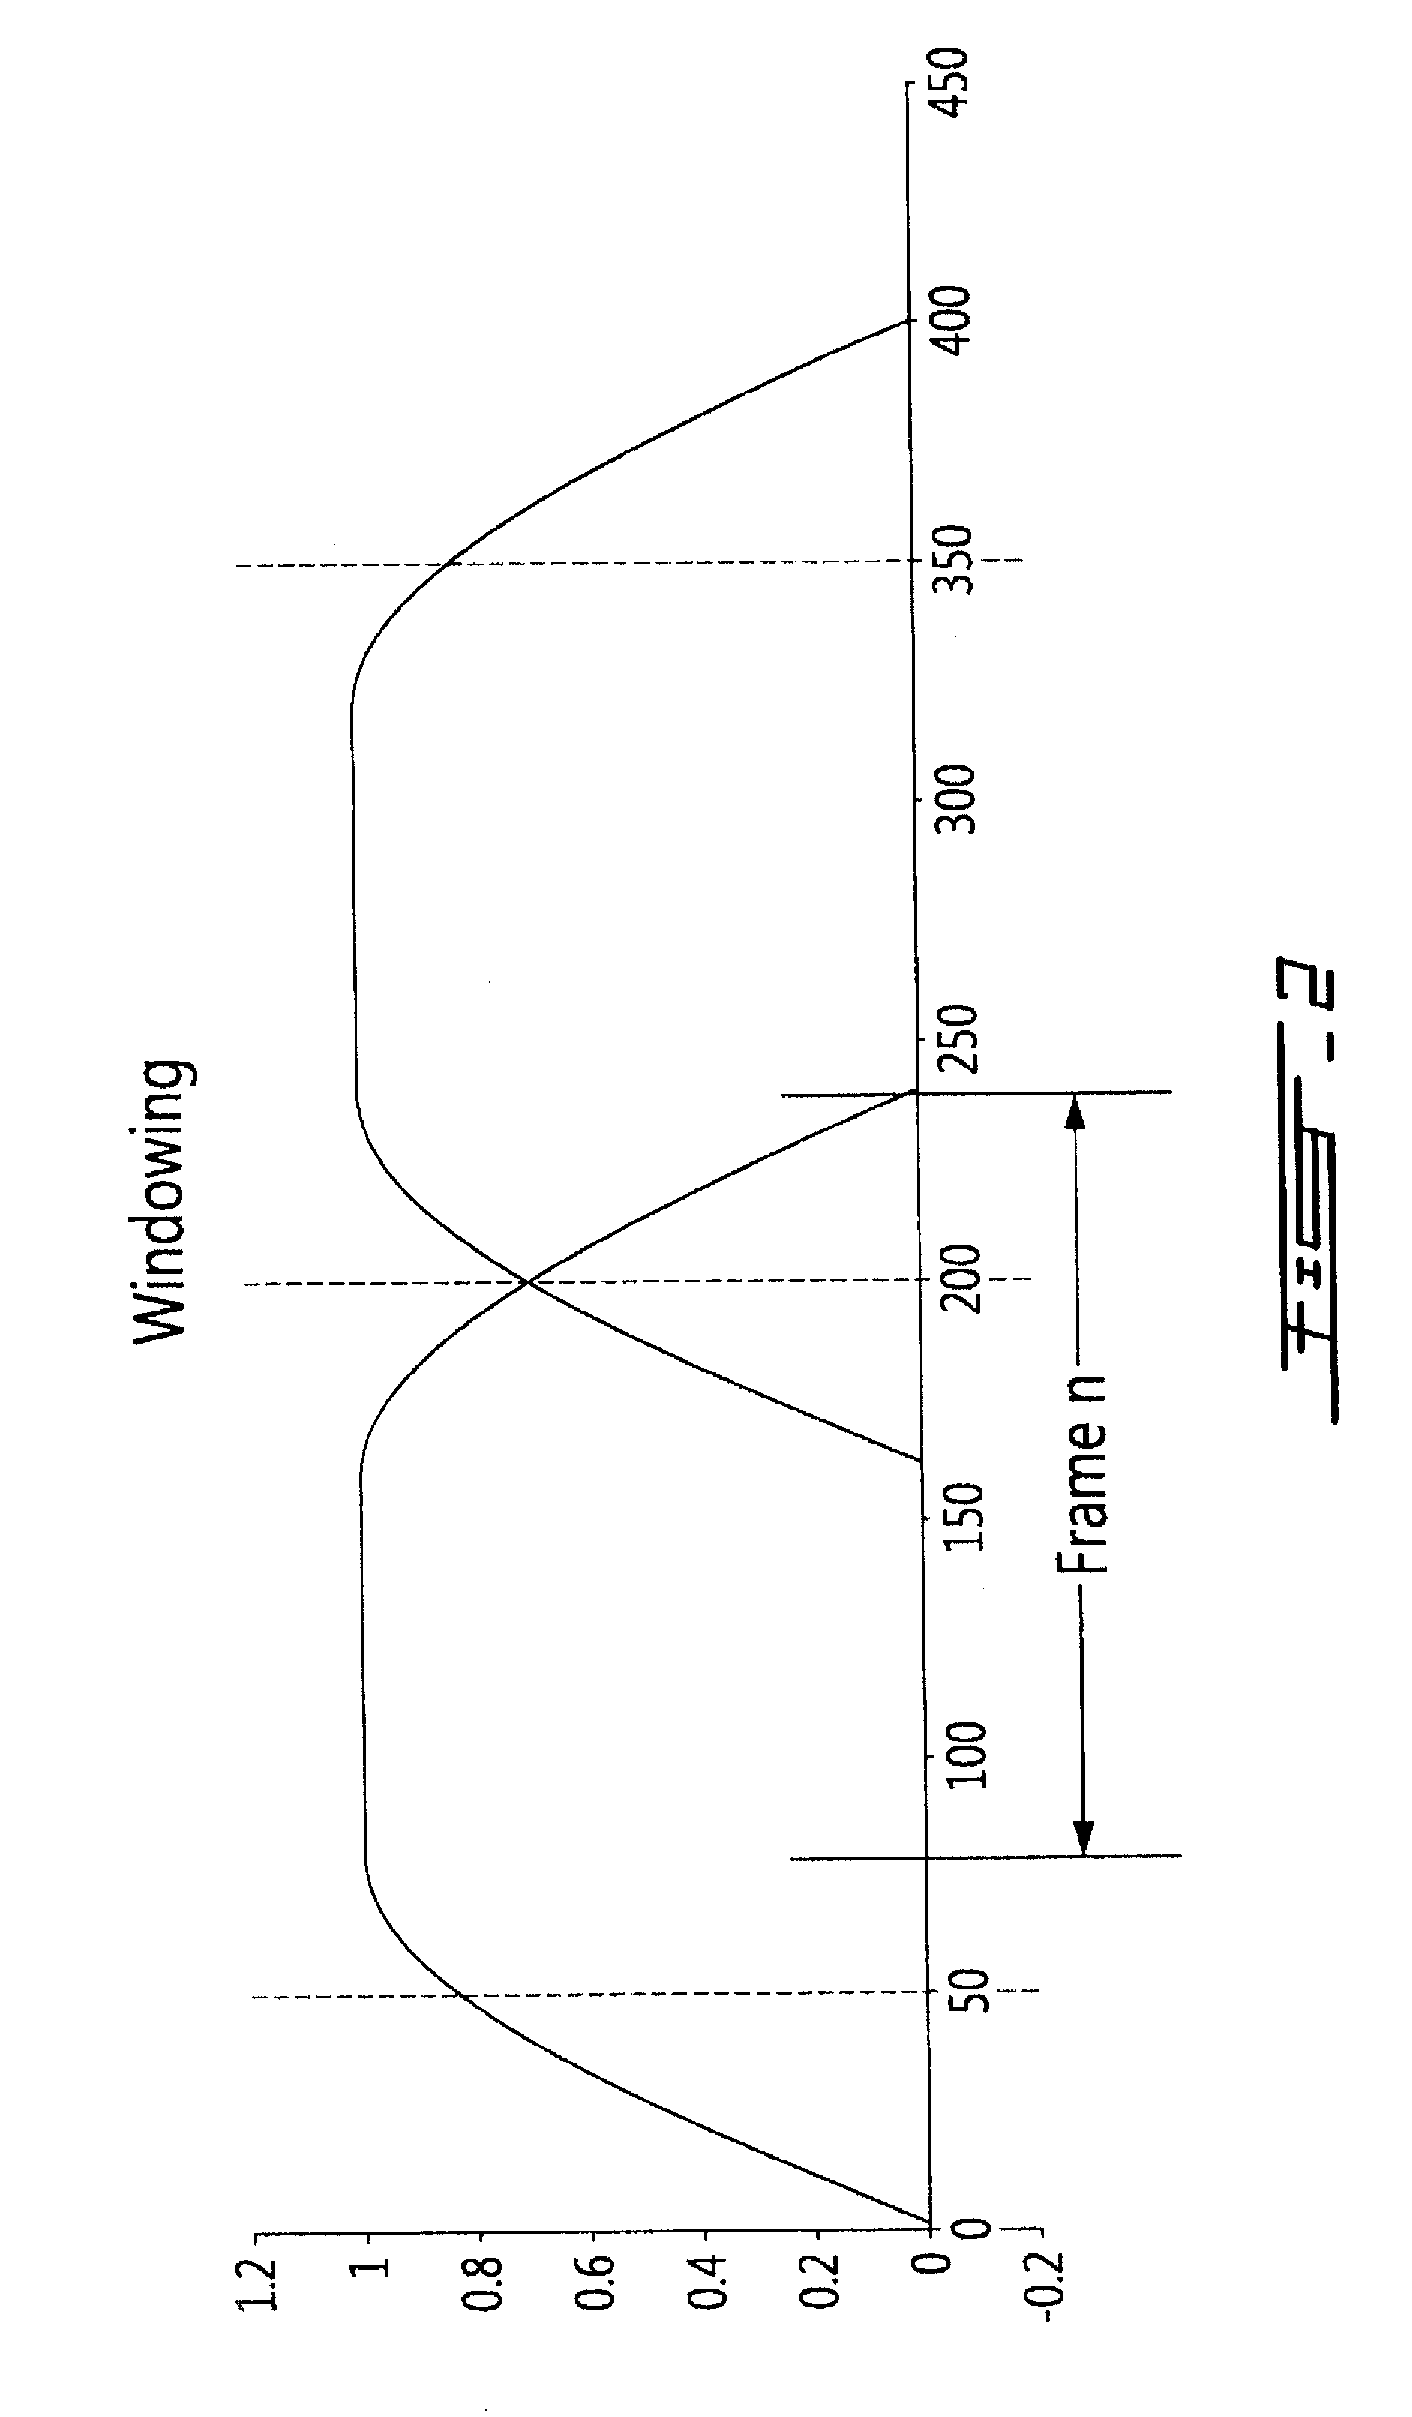 System and Method for Enhancing a Decoded  Tonal Sound Signal